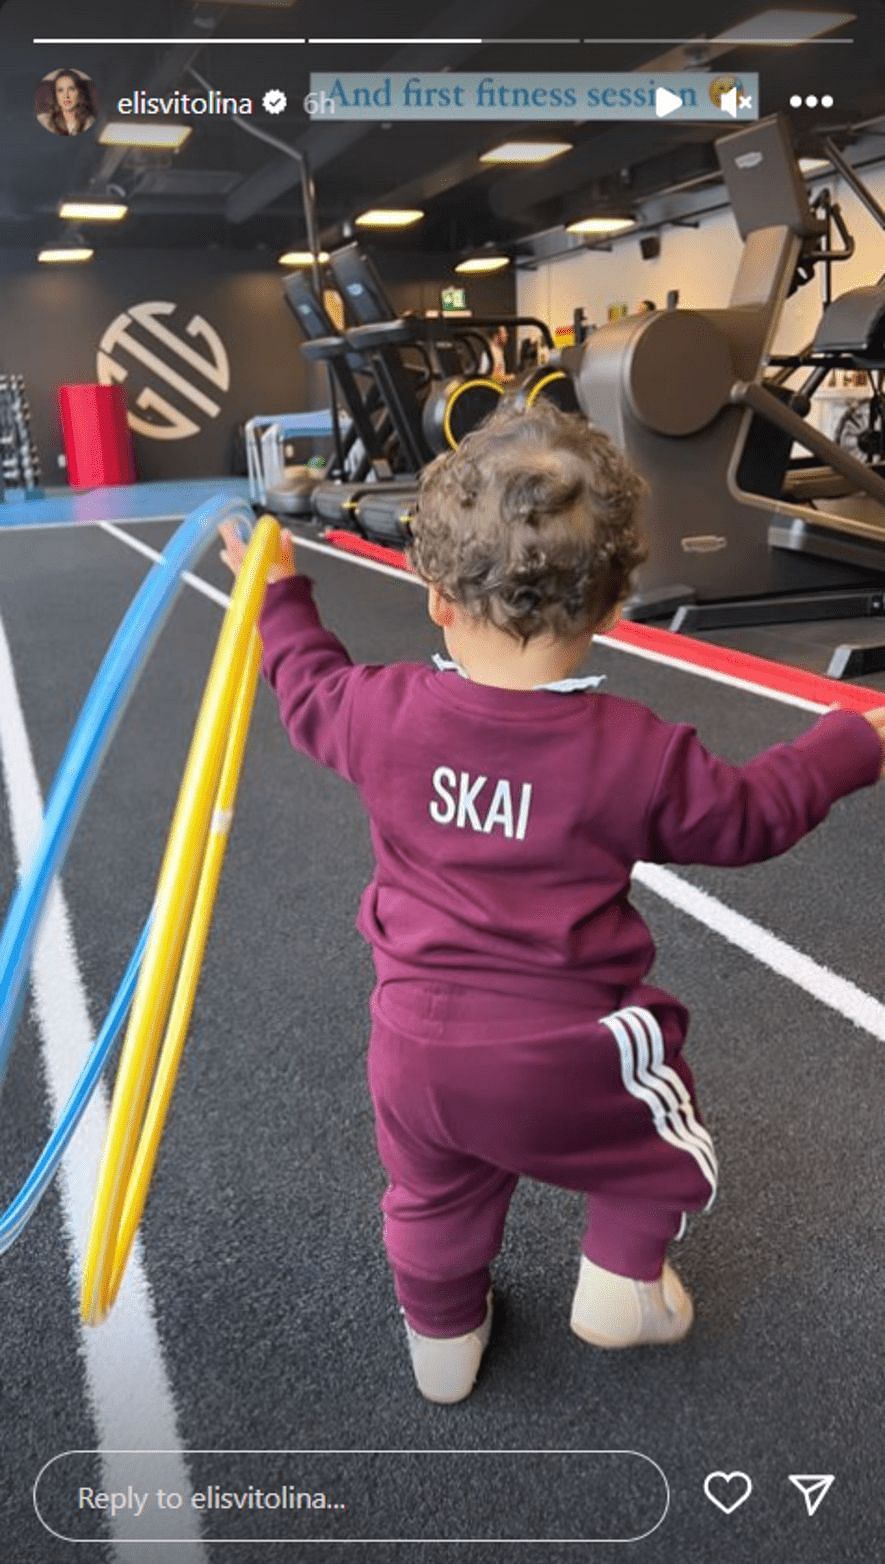 Elina Svitolina&#039;s daughter in the gym.